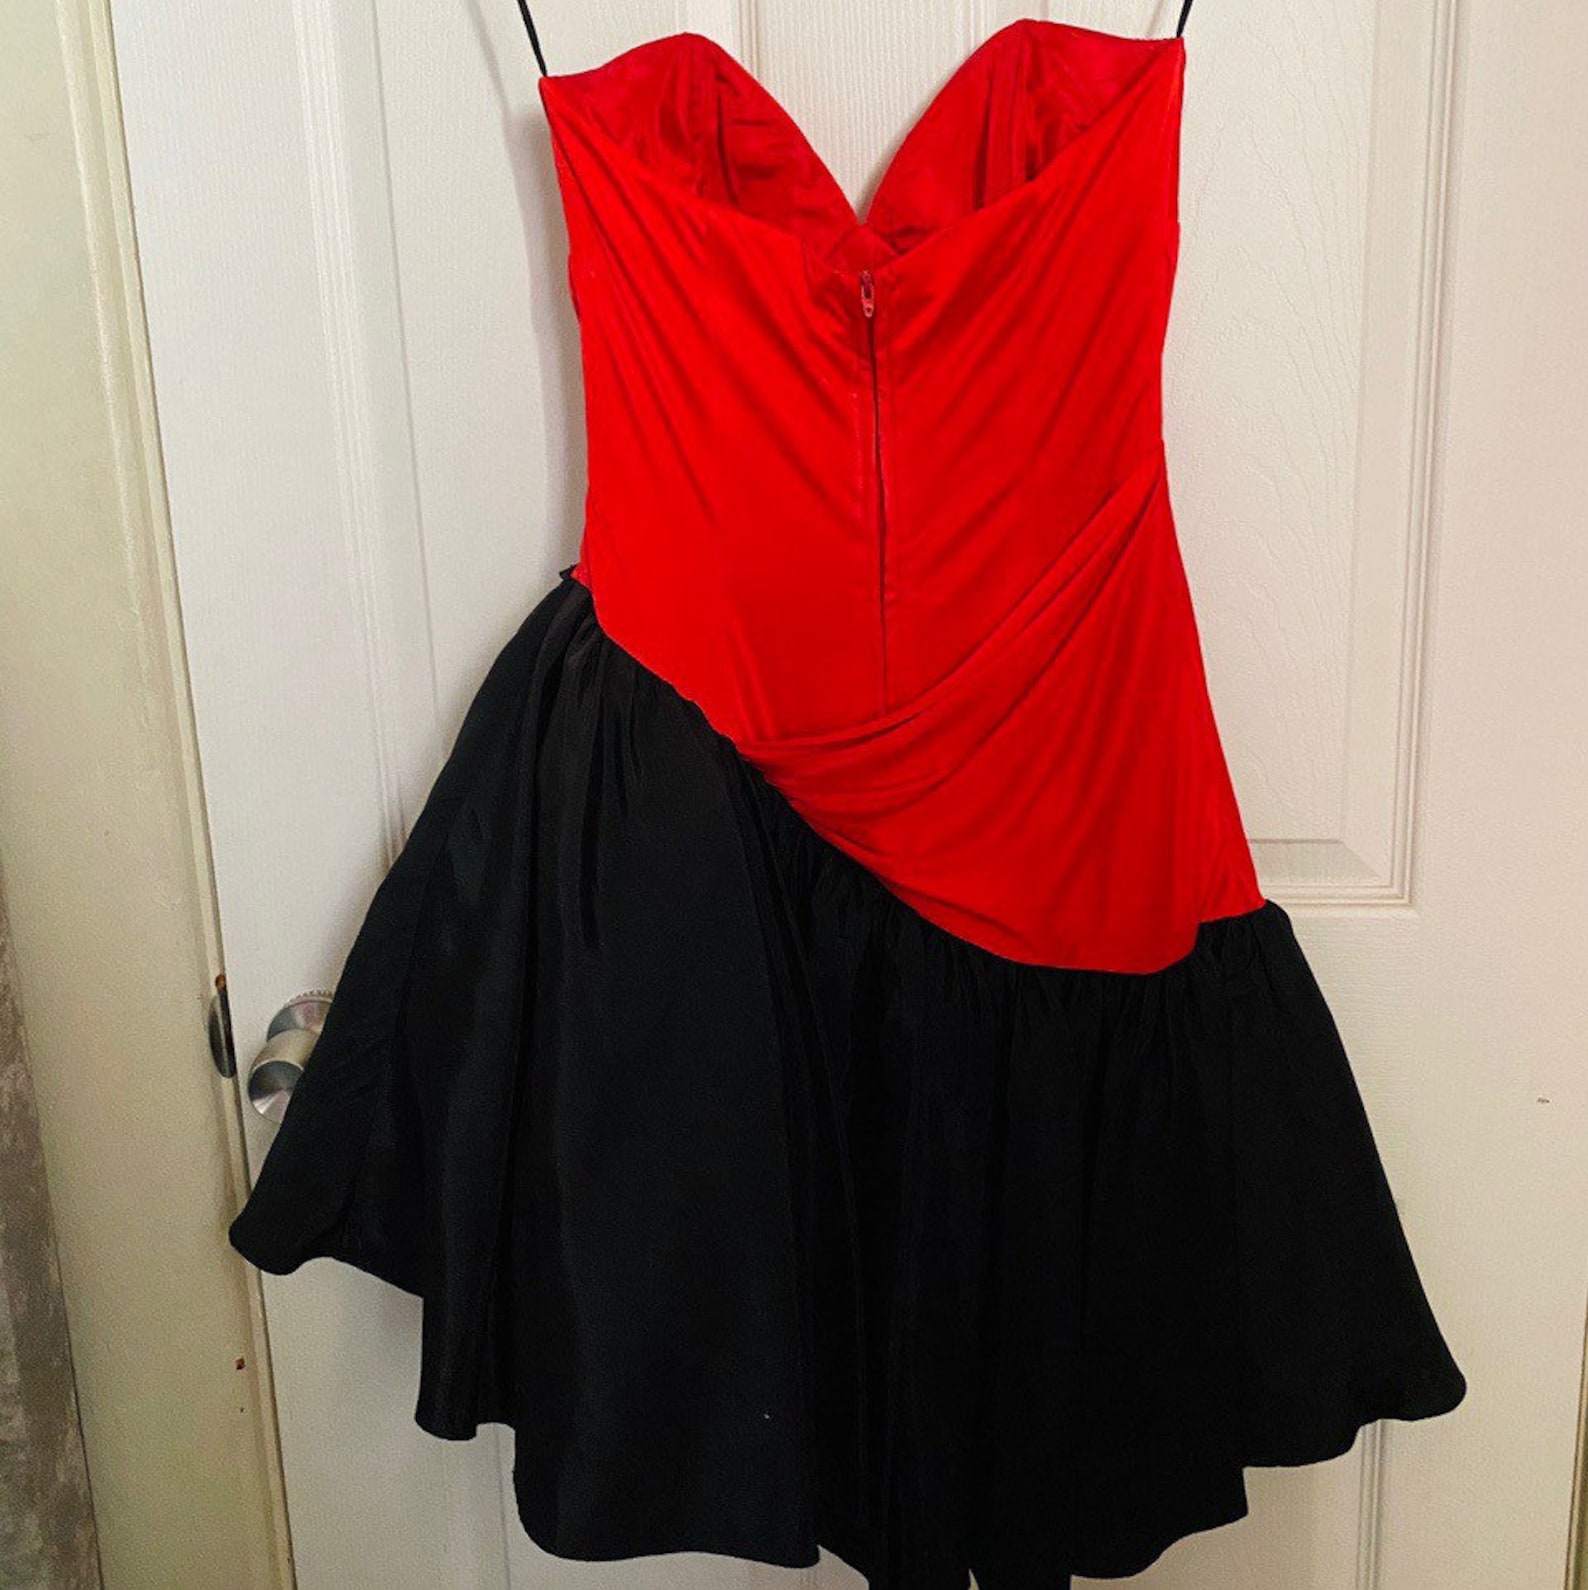 1986 Red and Black Prom Dress size 7/8 | Etsy